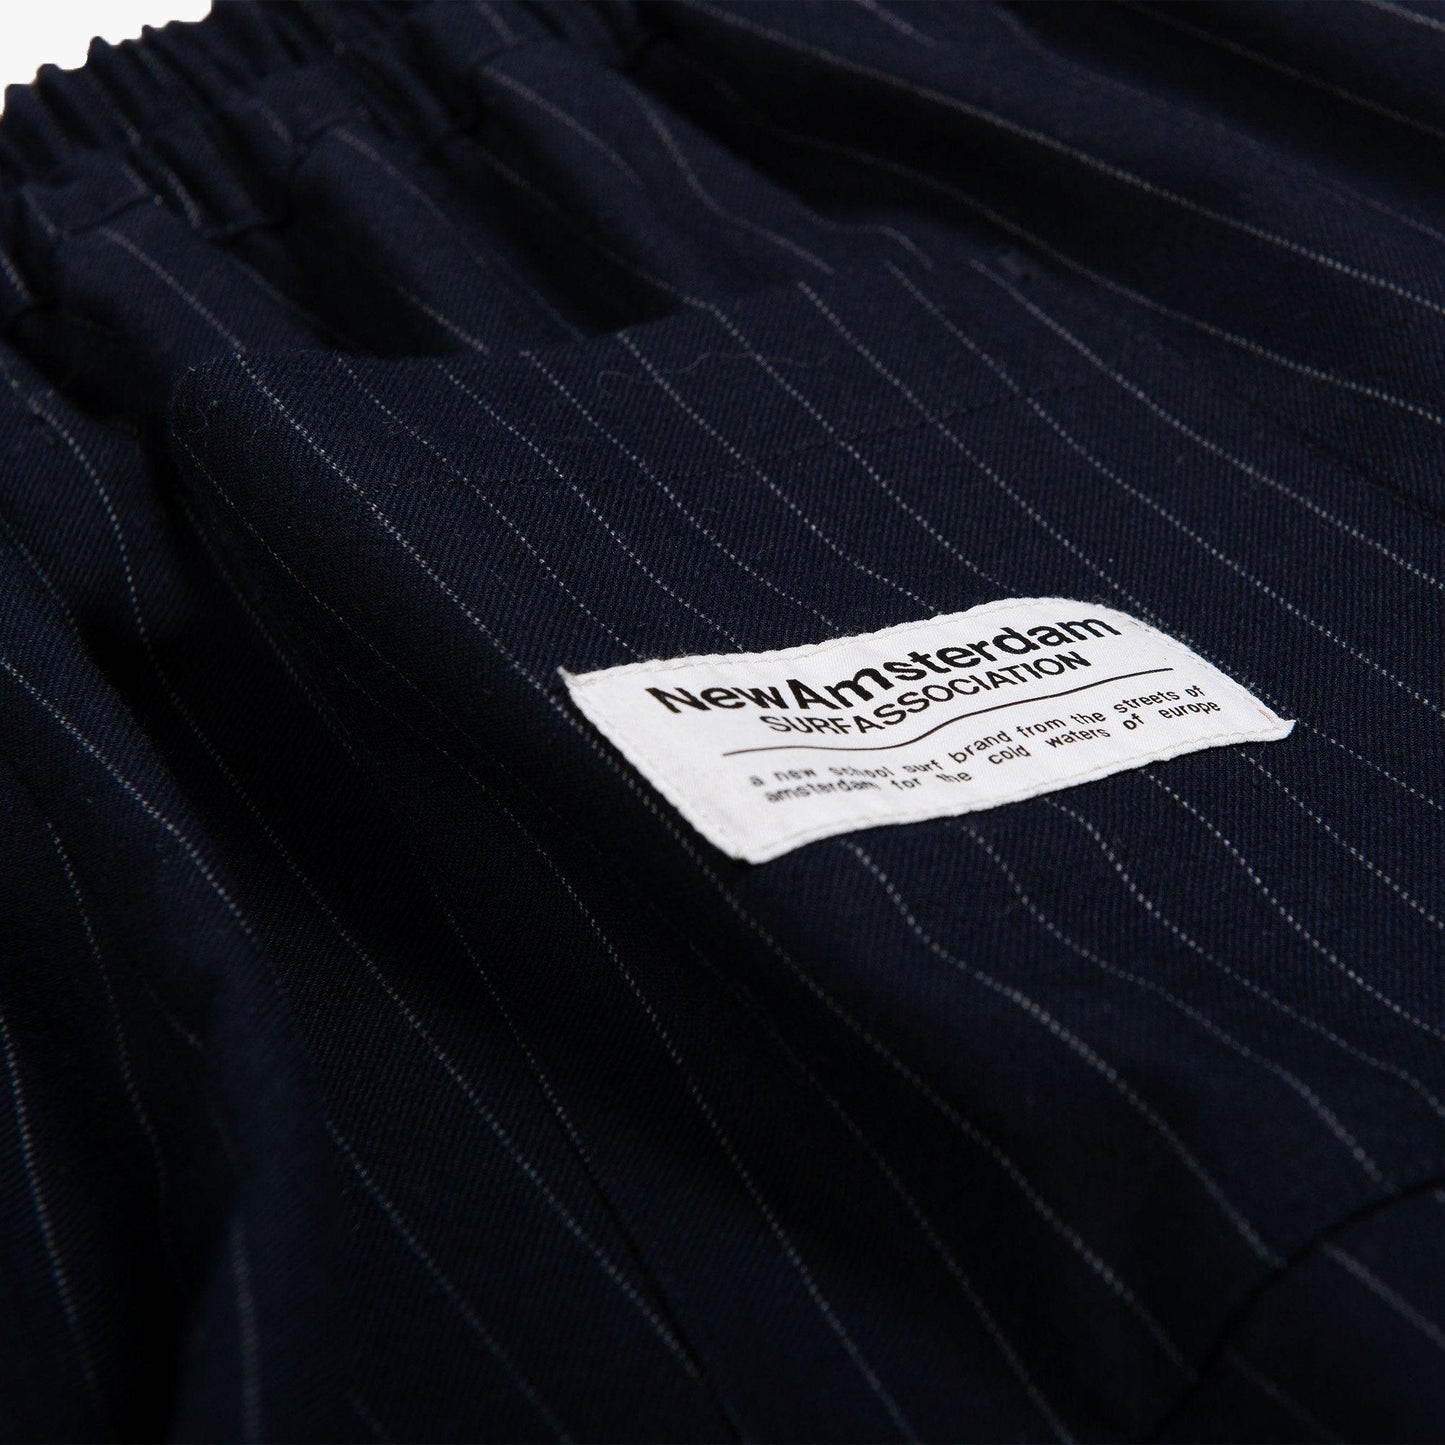 New Amsterdam Surf Association After Trouser in Pinstripe Navy